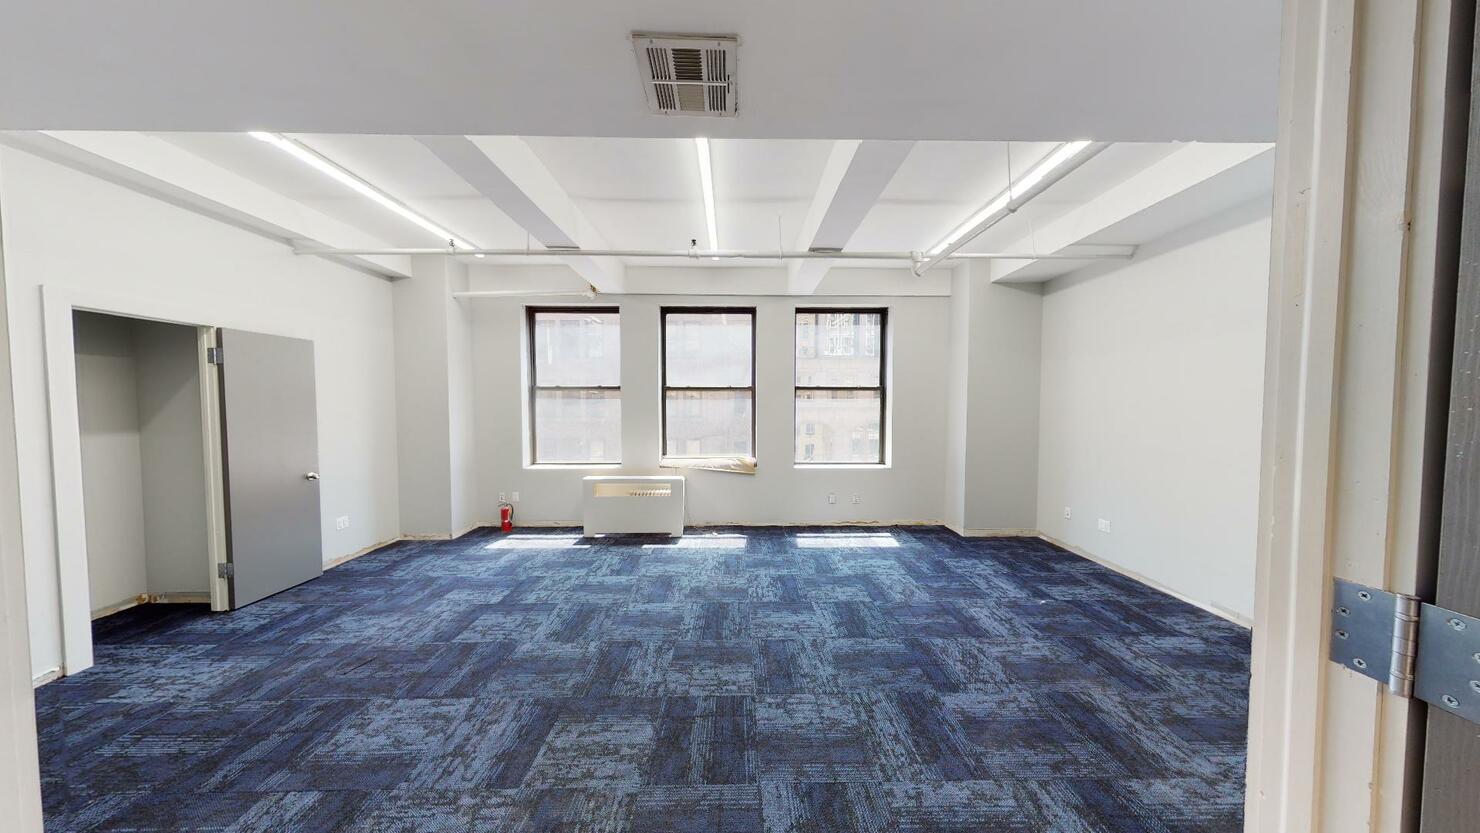 255 West 36th Street Office Space - Bright and Spacious Office Room